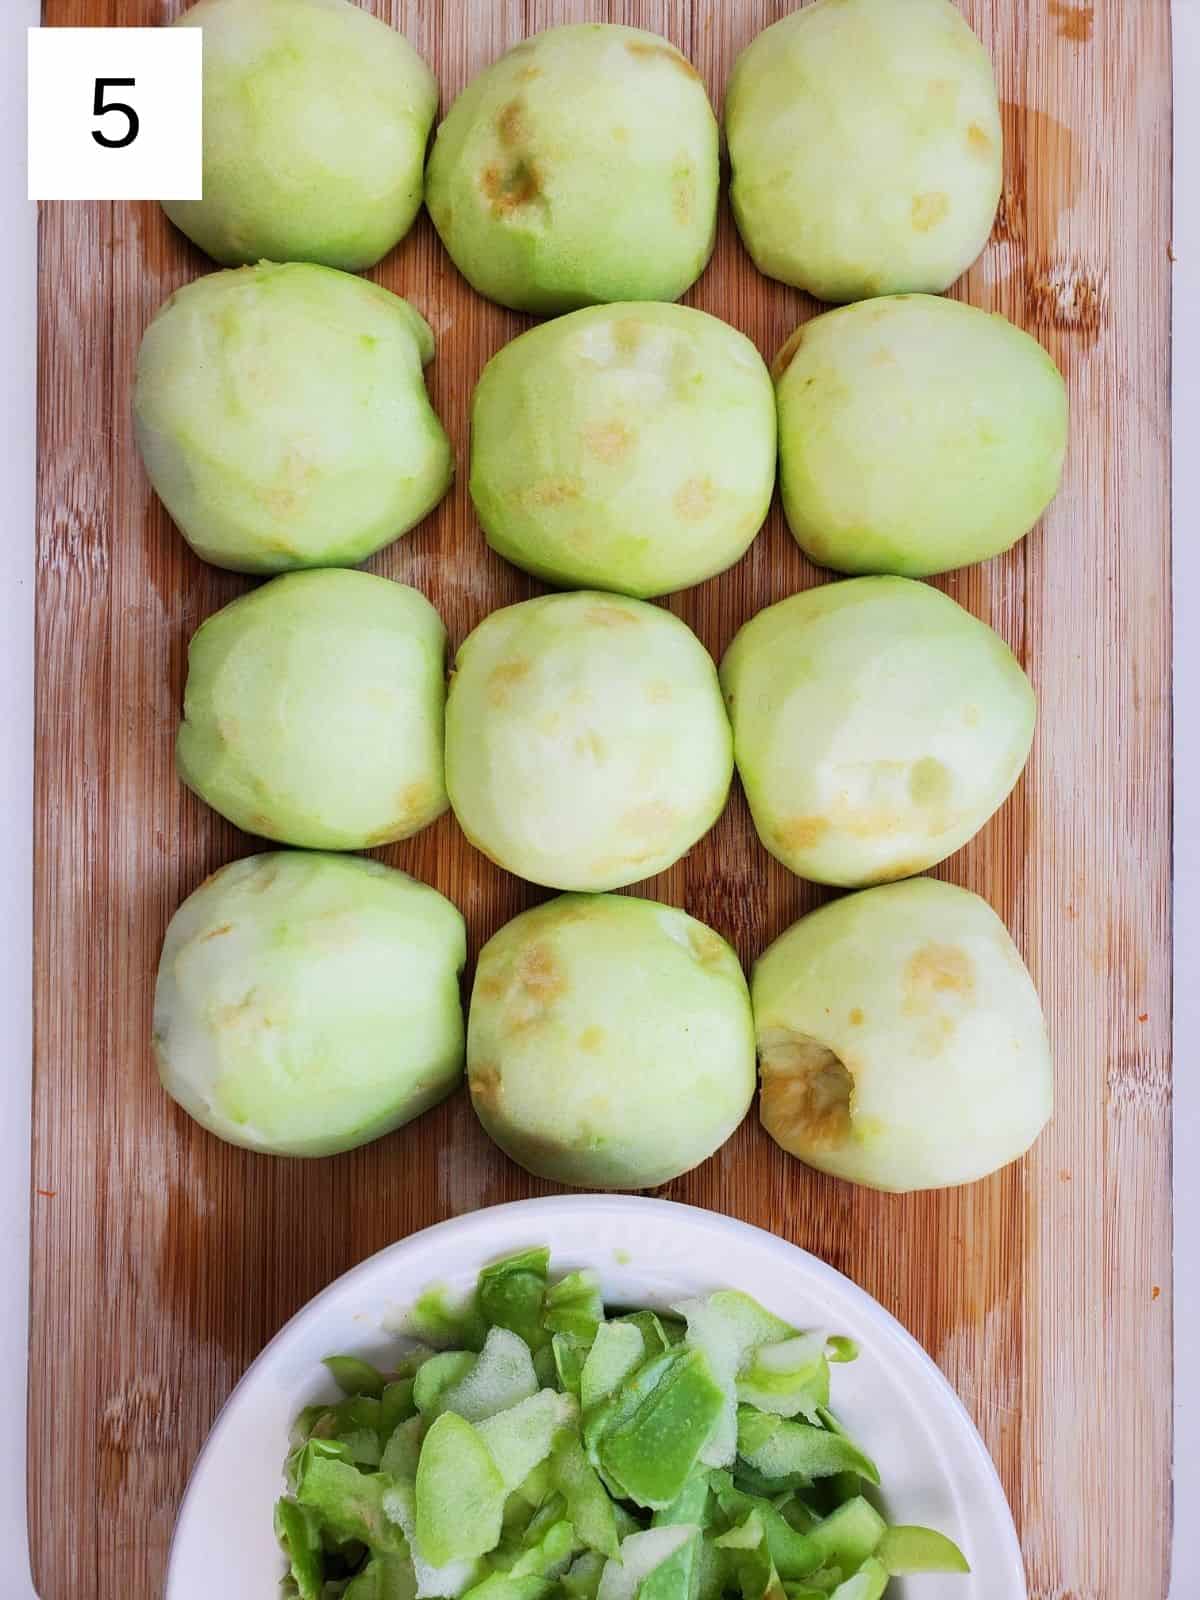 peeled halves of apples on a wooden chopping board.